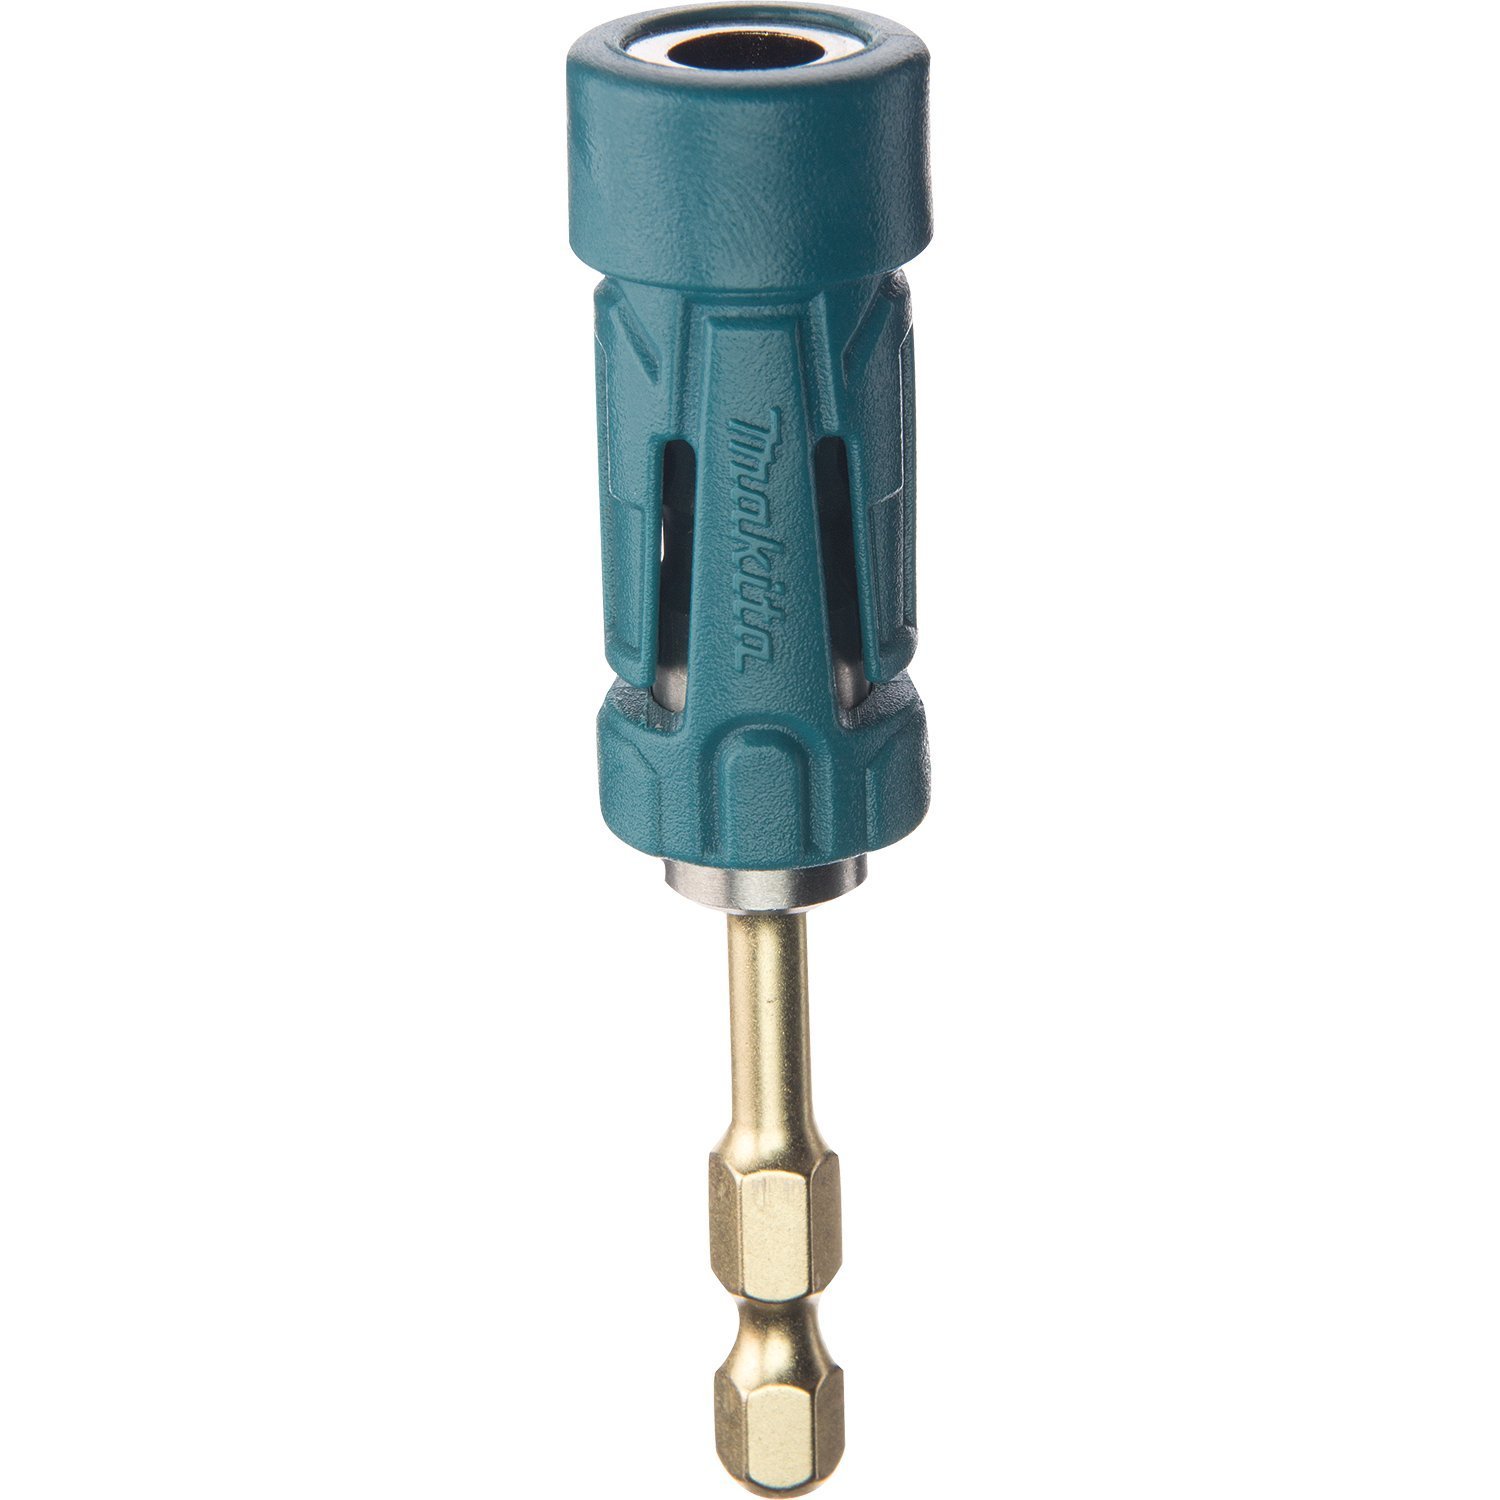 Makita B-35097 Impact Gold Ultra-Magnetic Torsion Insert Bit Holder, List Price is $5.6, Now Only $3, You Save $2.6